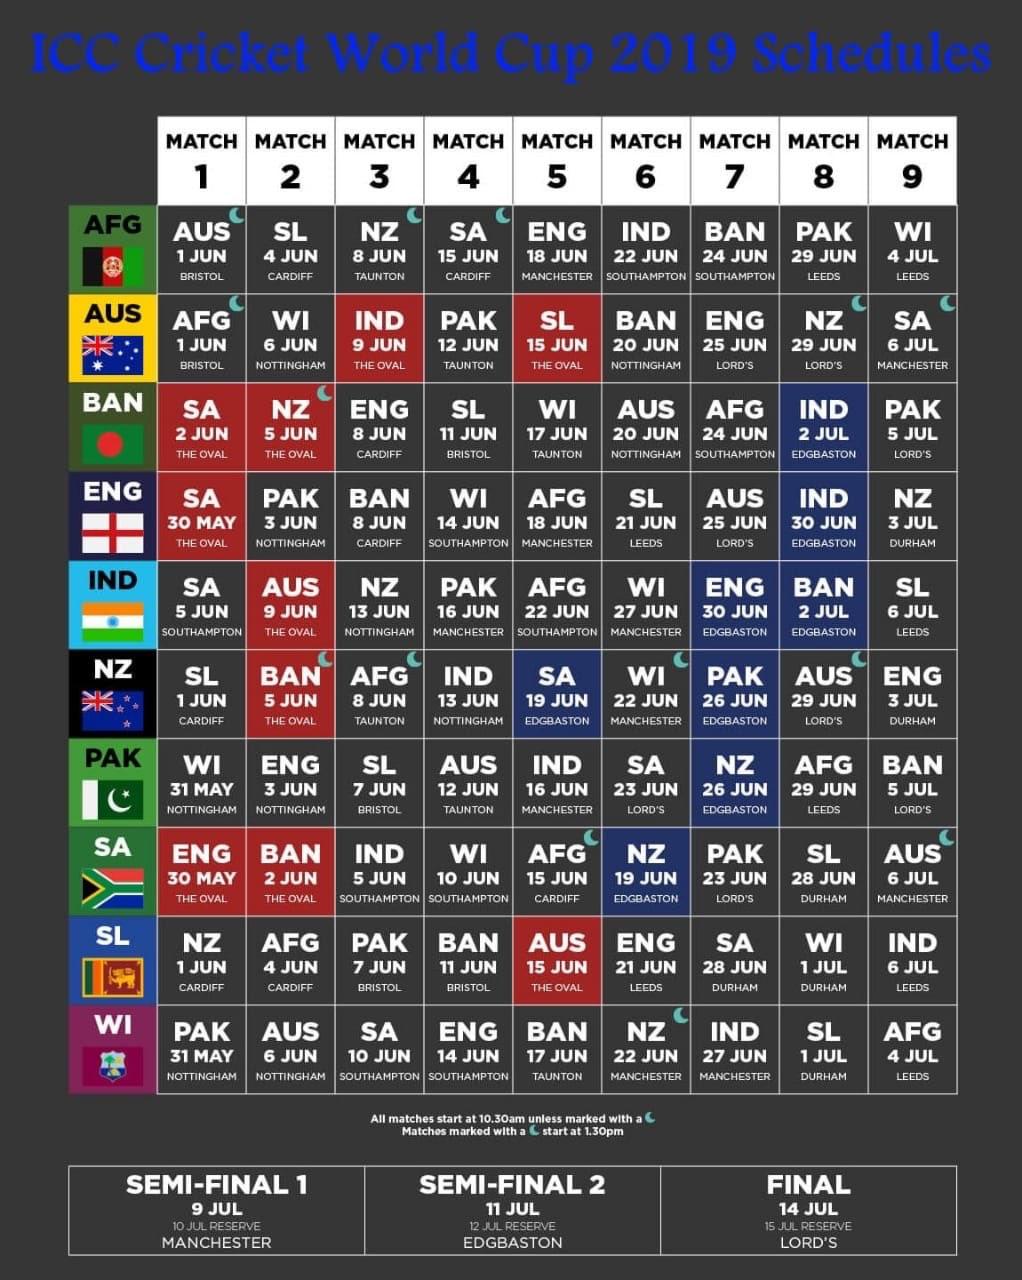 icc world cup 2019 schedule pdf in nz time